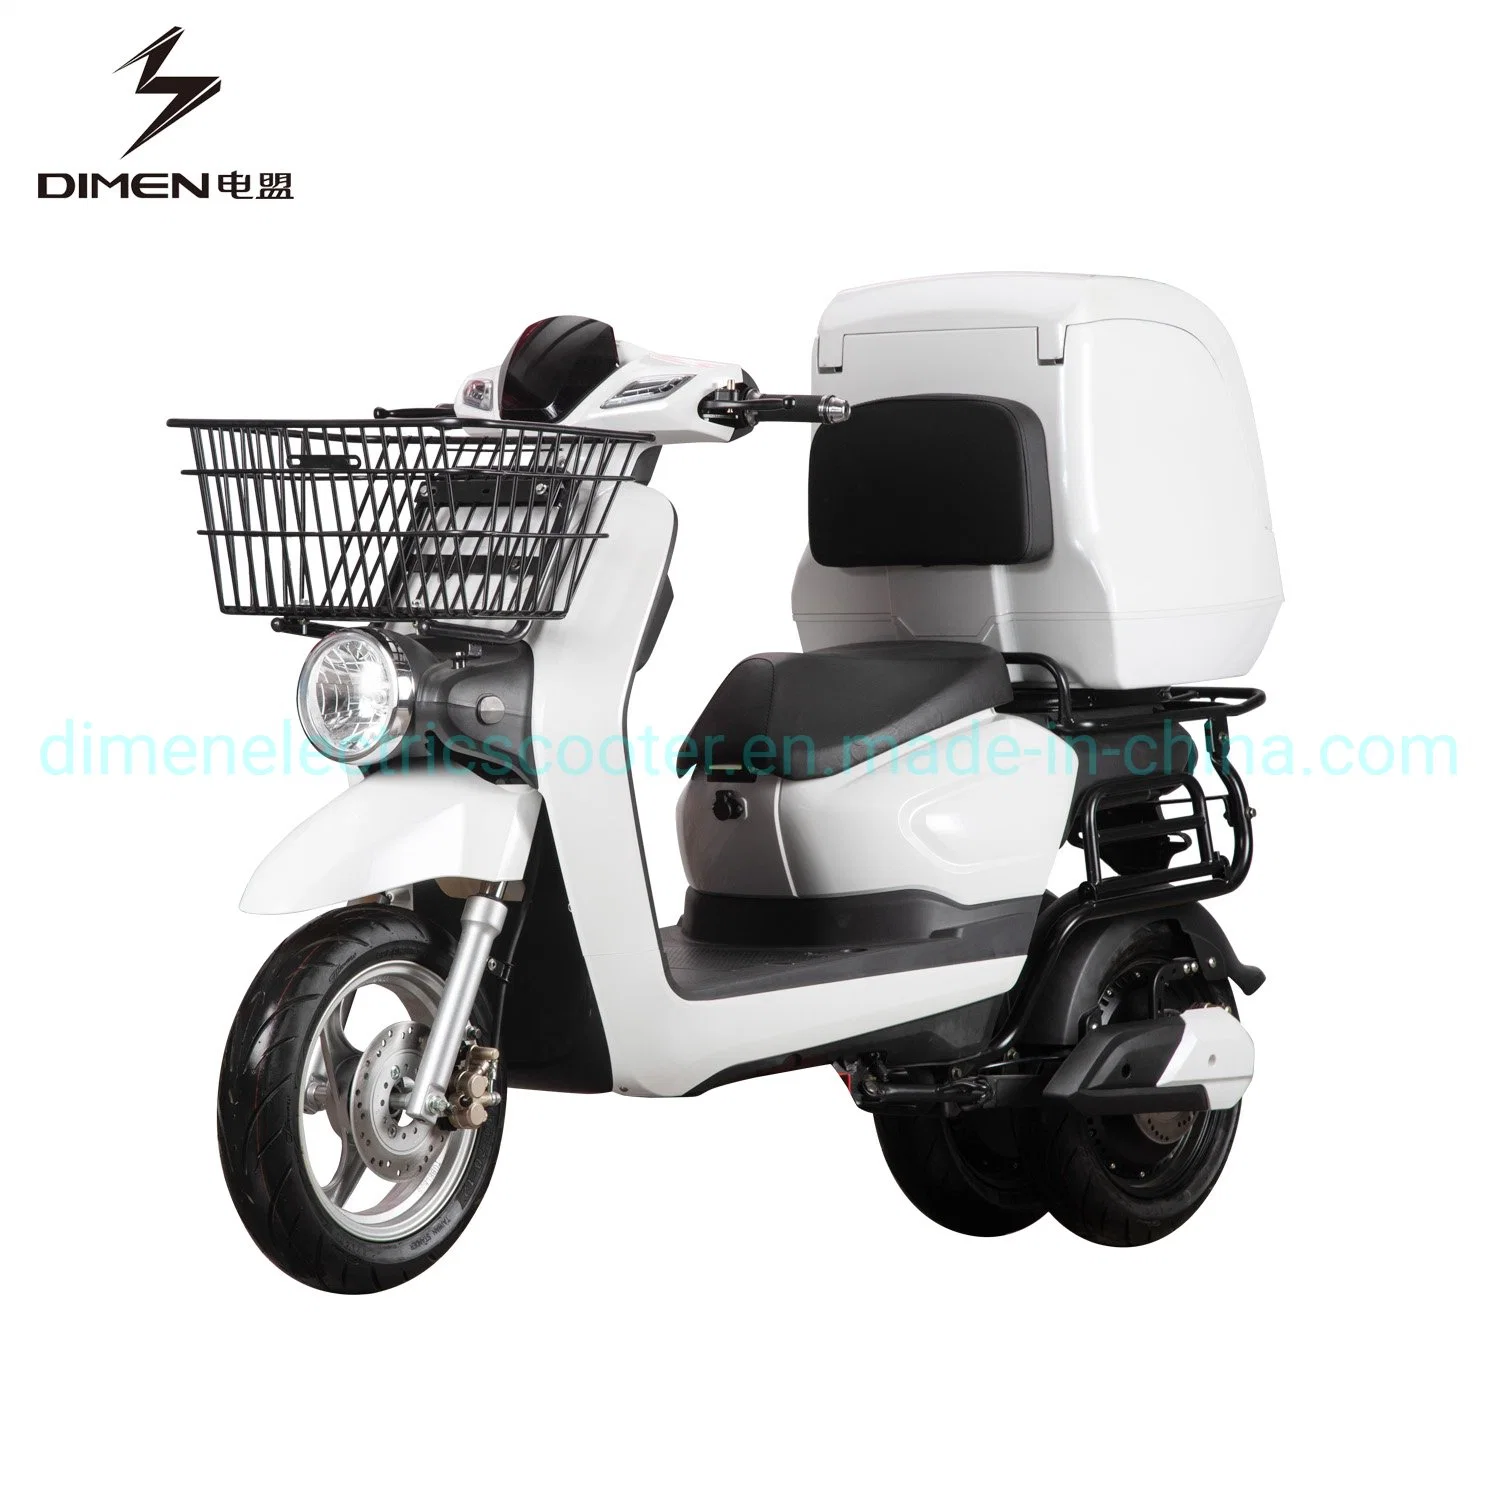 Double 1500W Motor Double Controller Electric Vehicle with Double Portable Battery